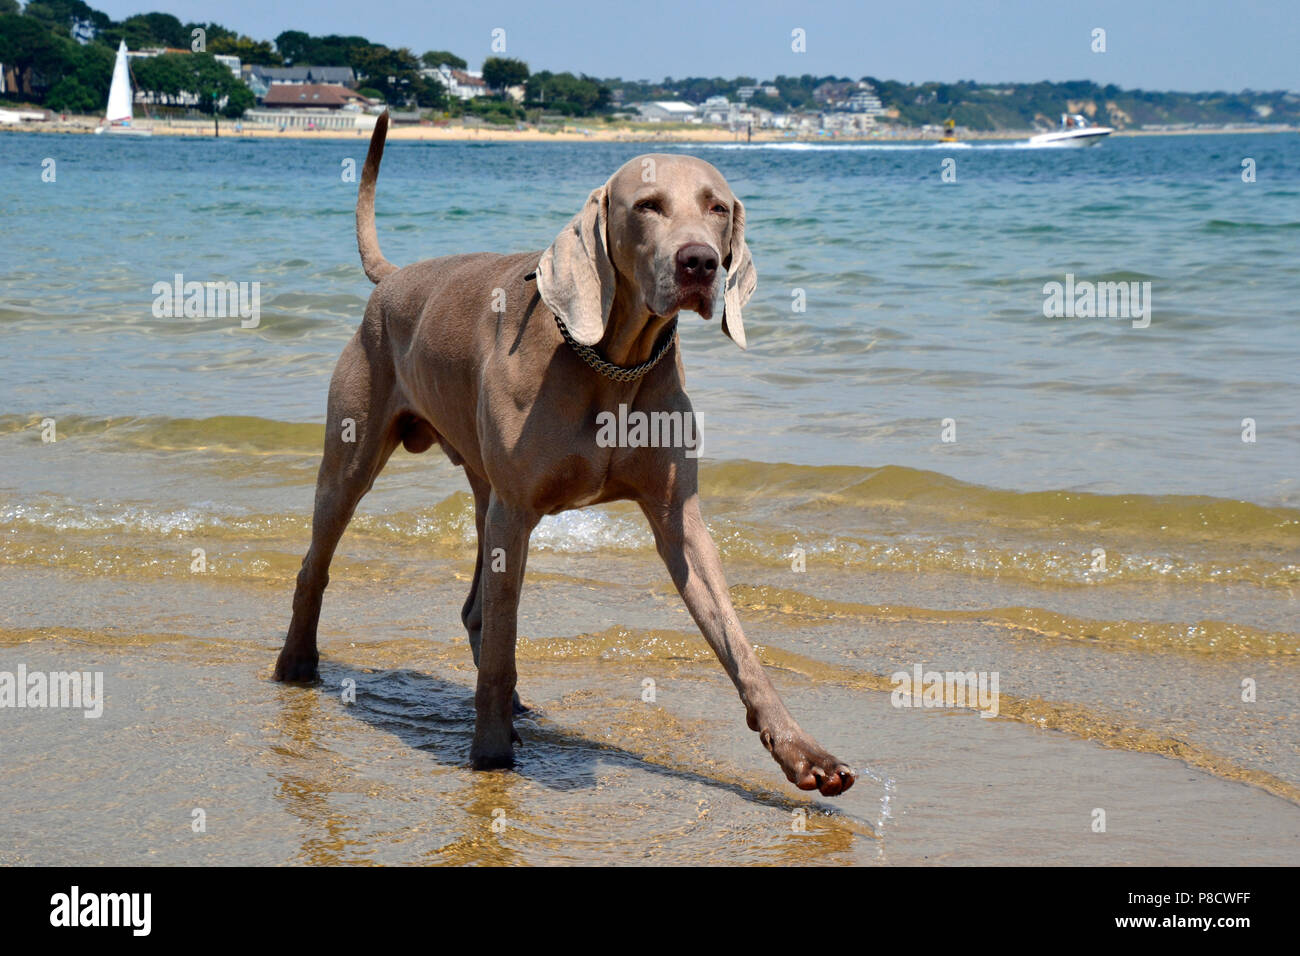 Dog paddling in the sea at Shell Bay, Swanage, Isle of Purbeck, Dorset, England, UK Stock Photo